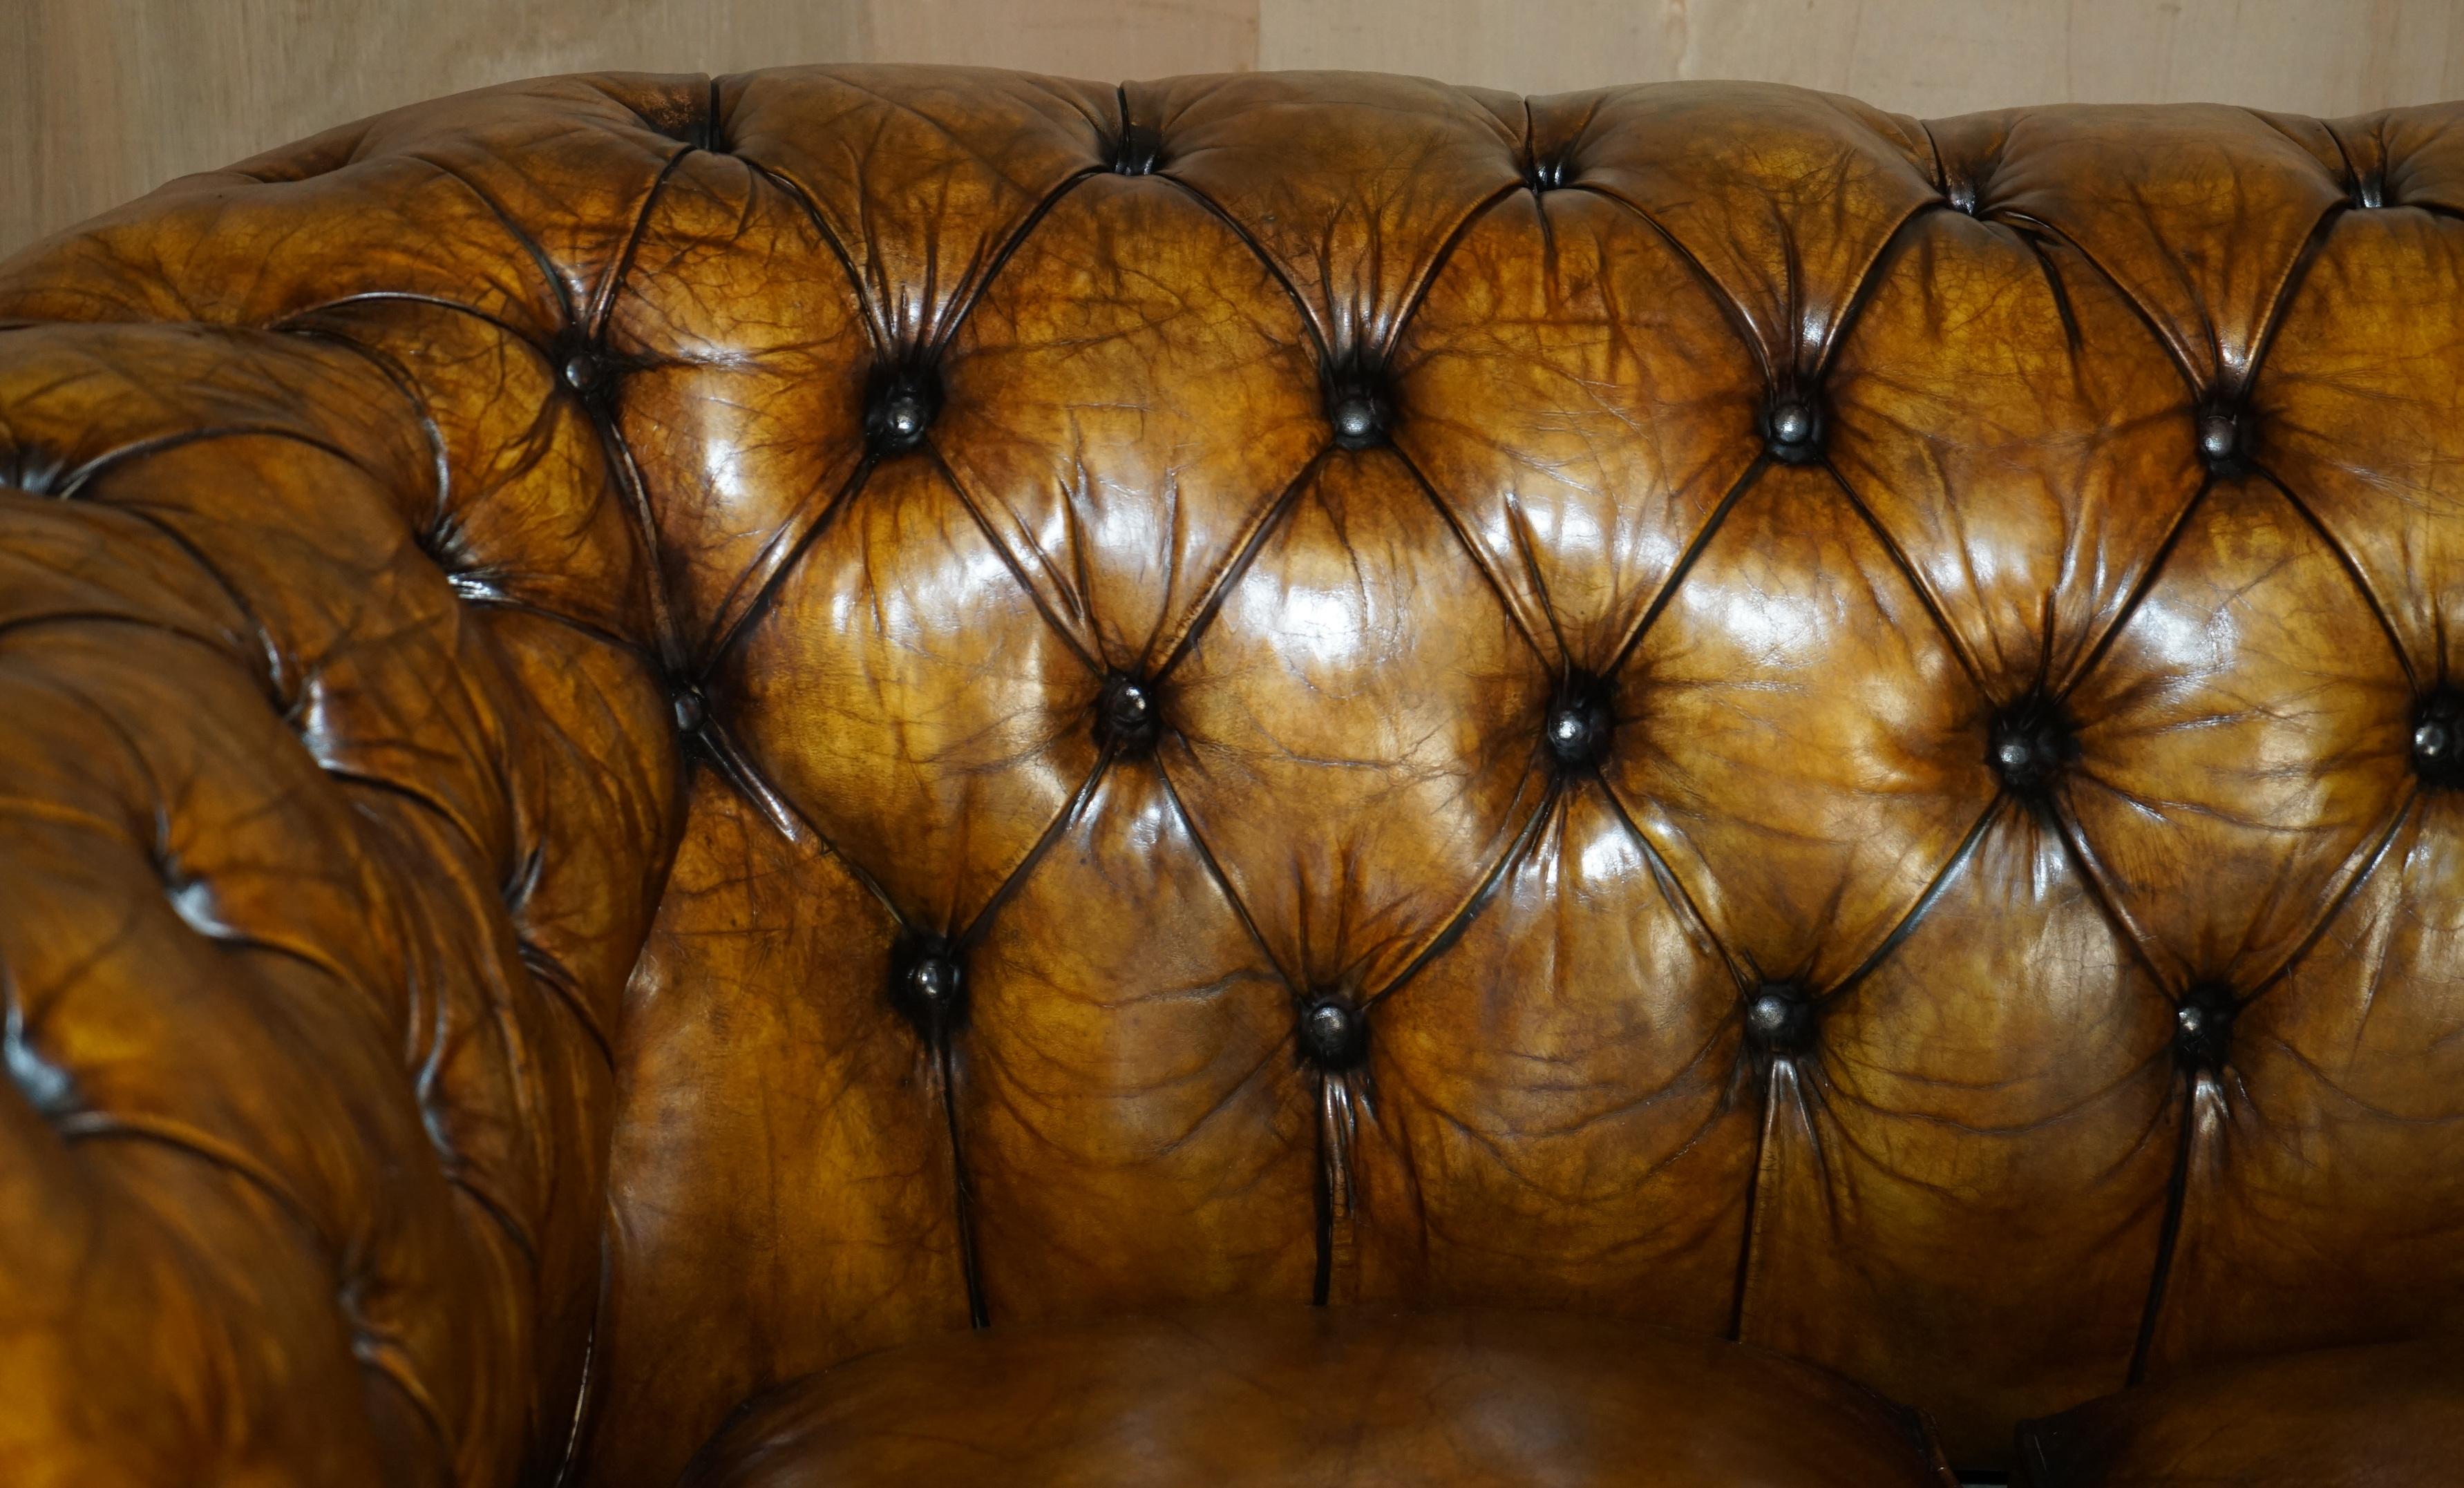 brown chesterfield sofa bed